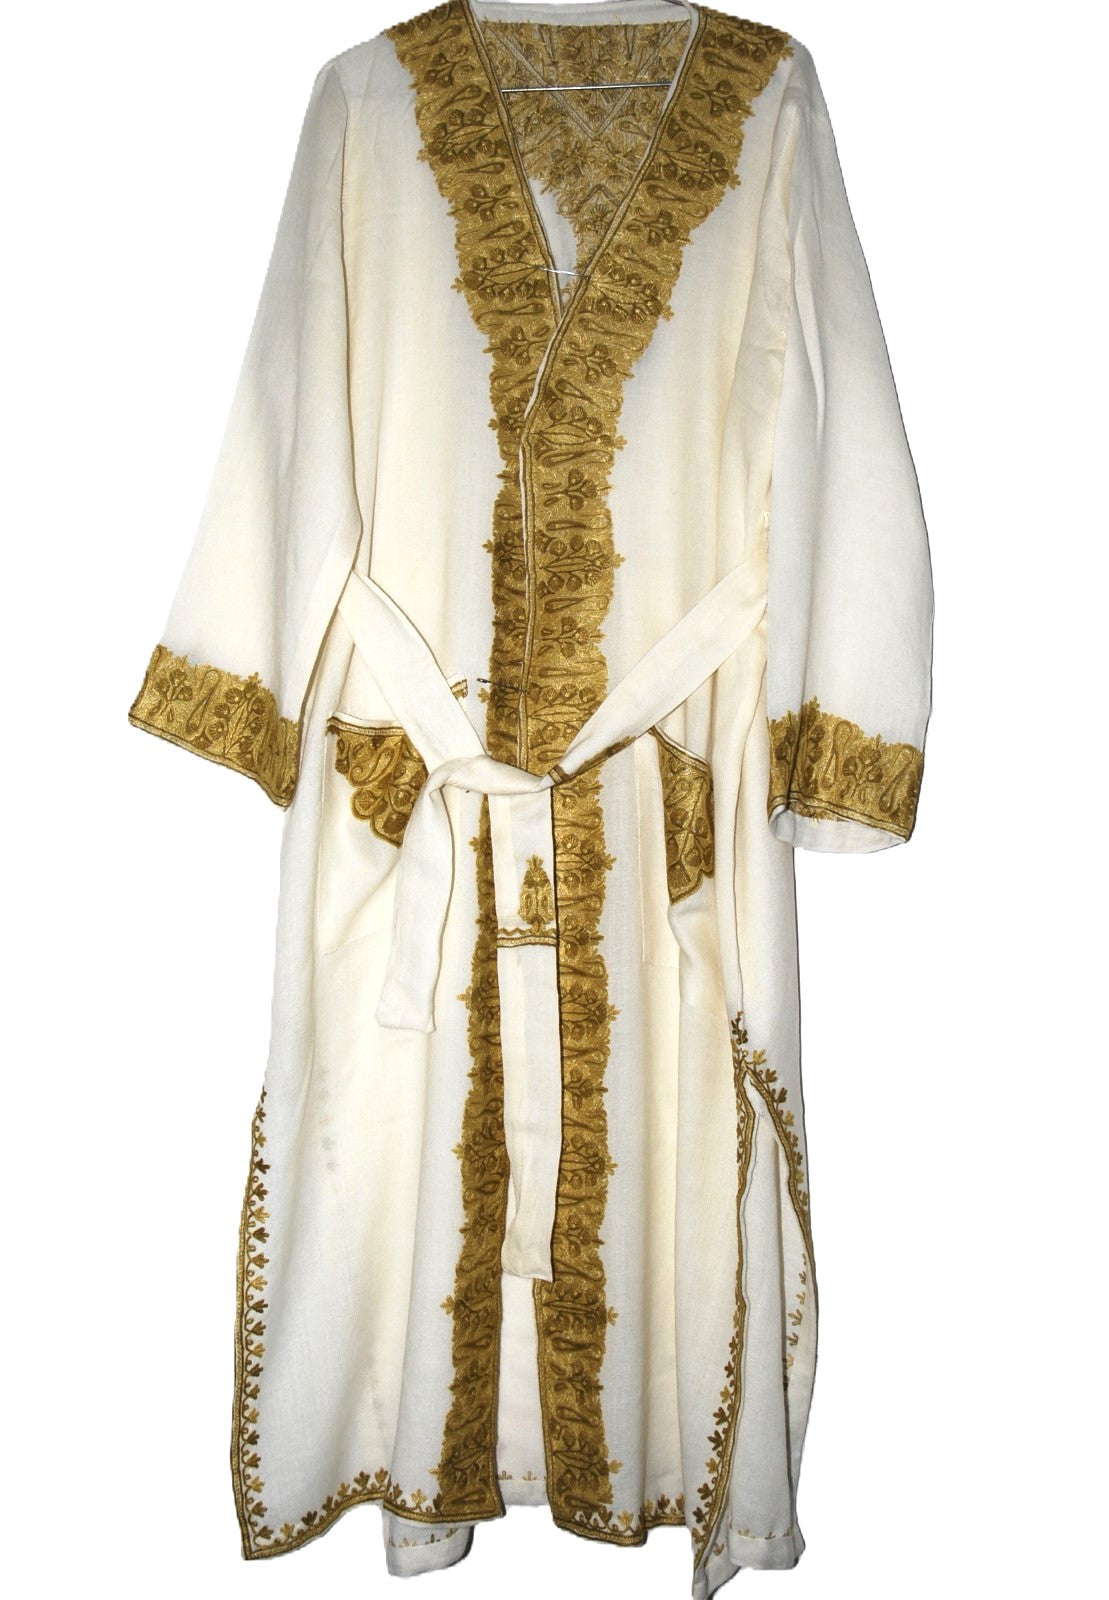 Embroidered Woolen Dressing Gown Ladies, Gold on White  #WG-018